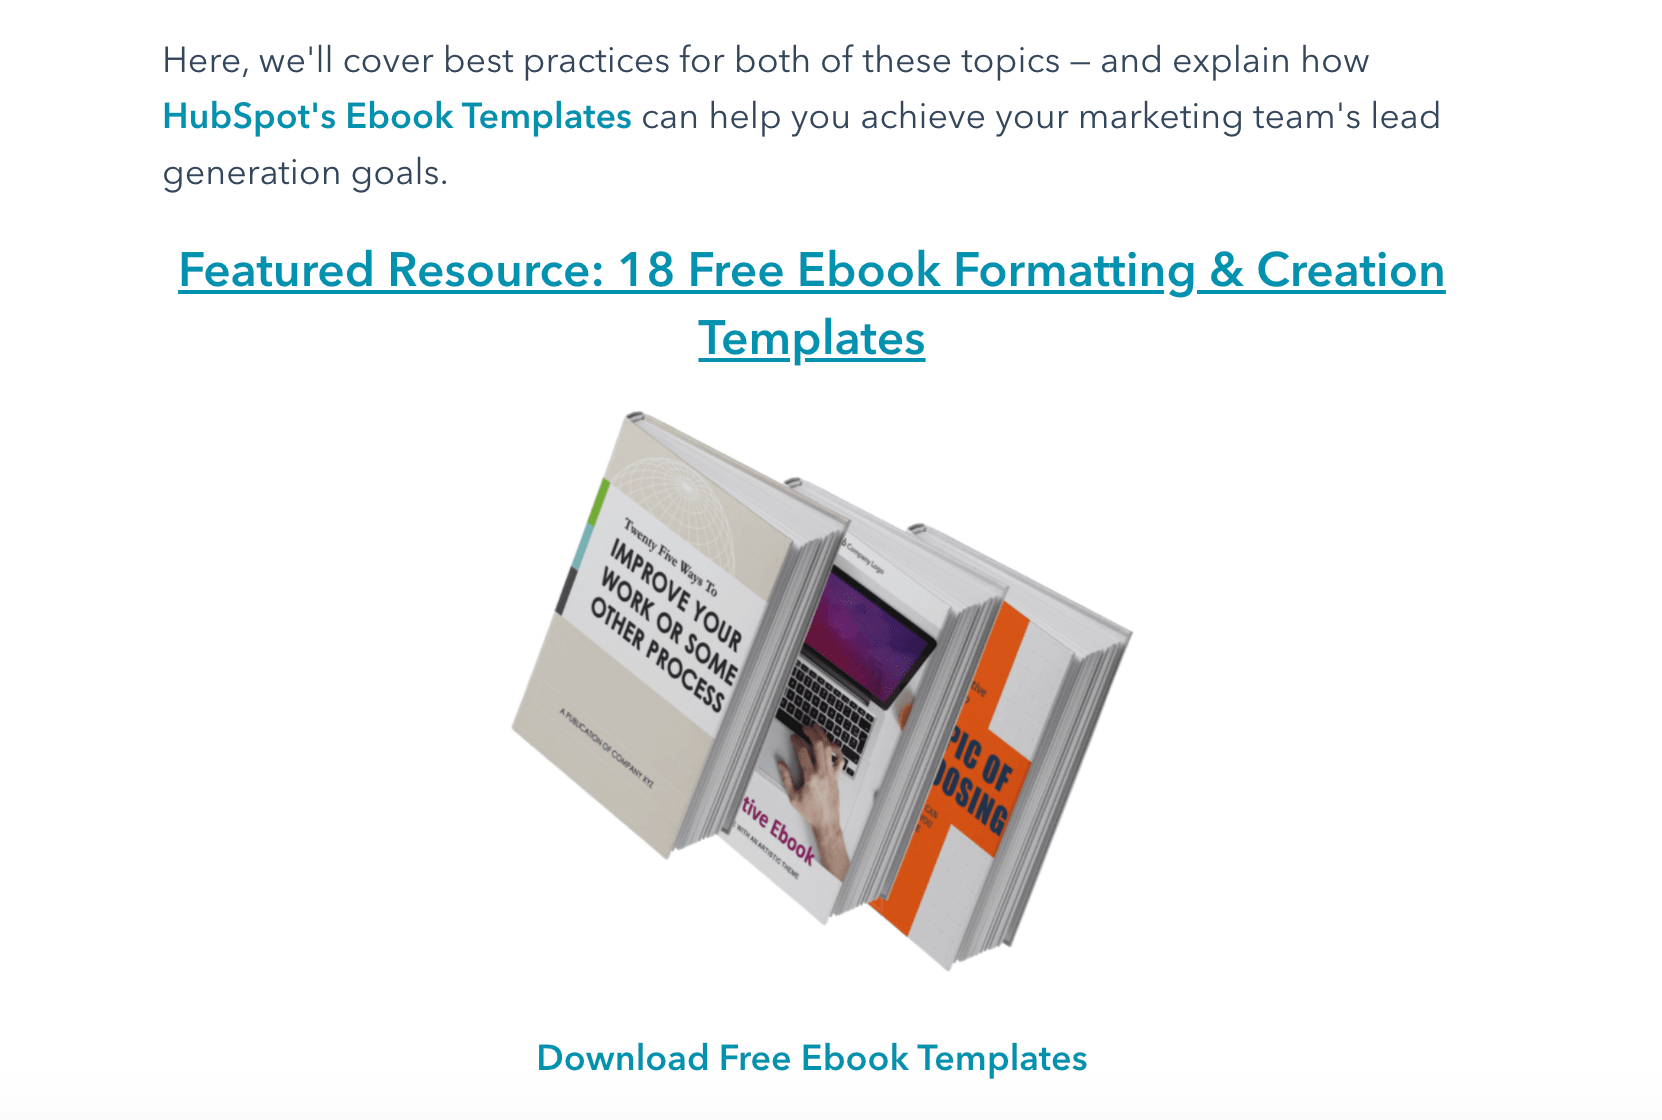 HubSpot's featured resource on ebook formatting templates